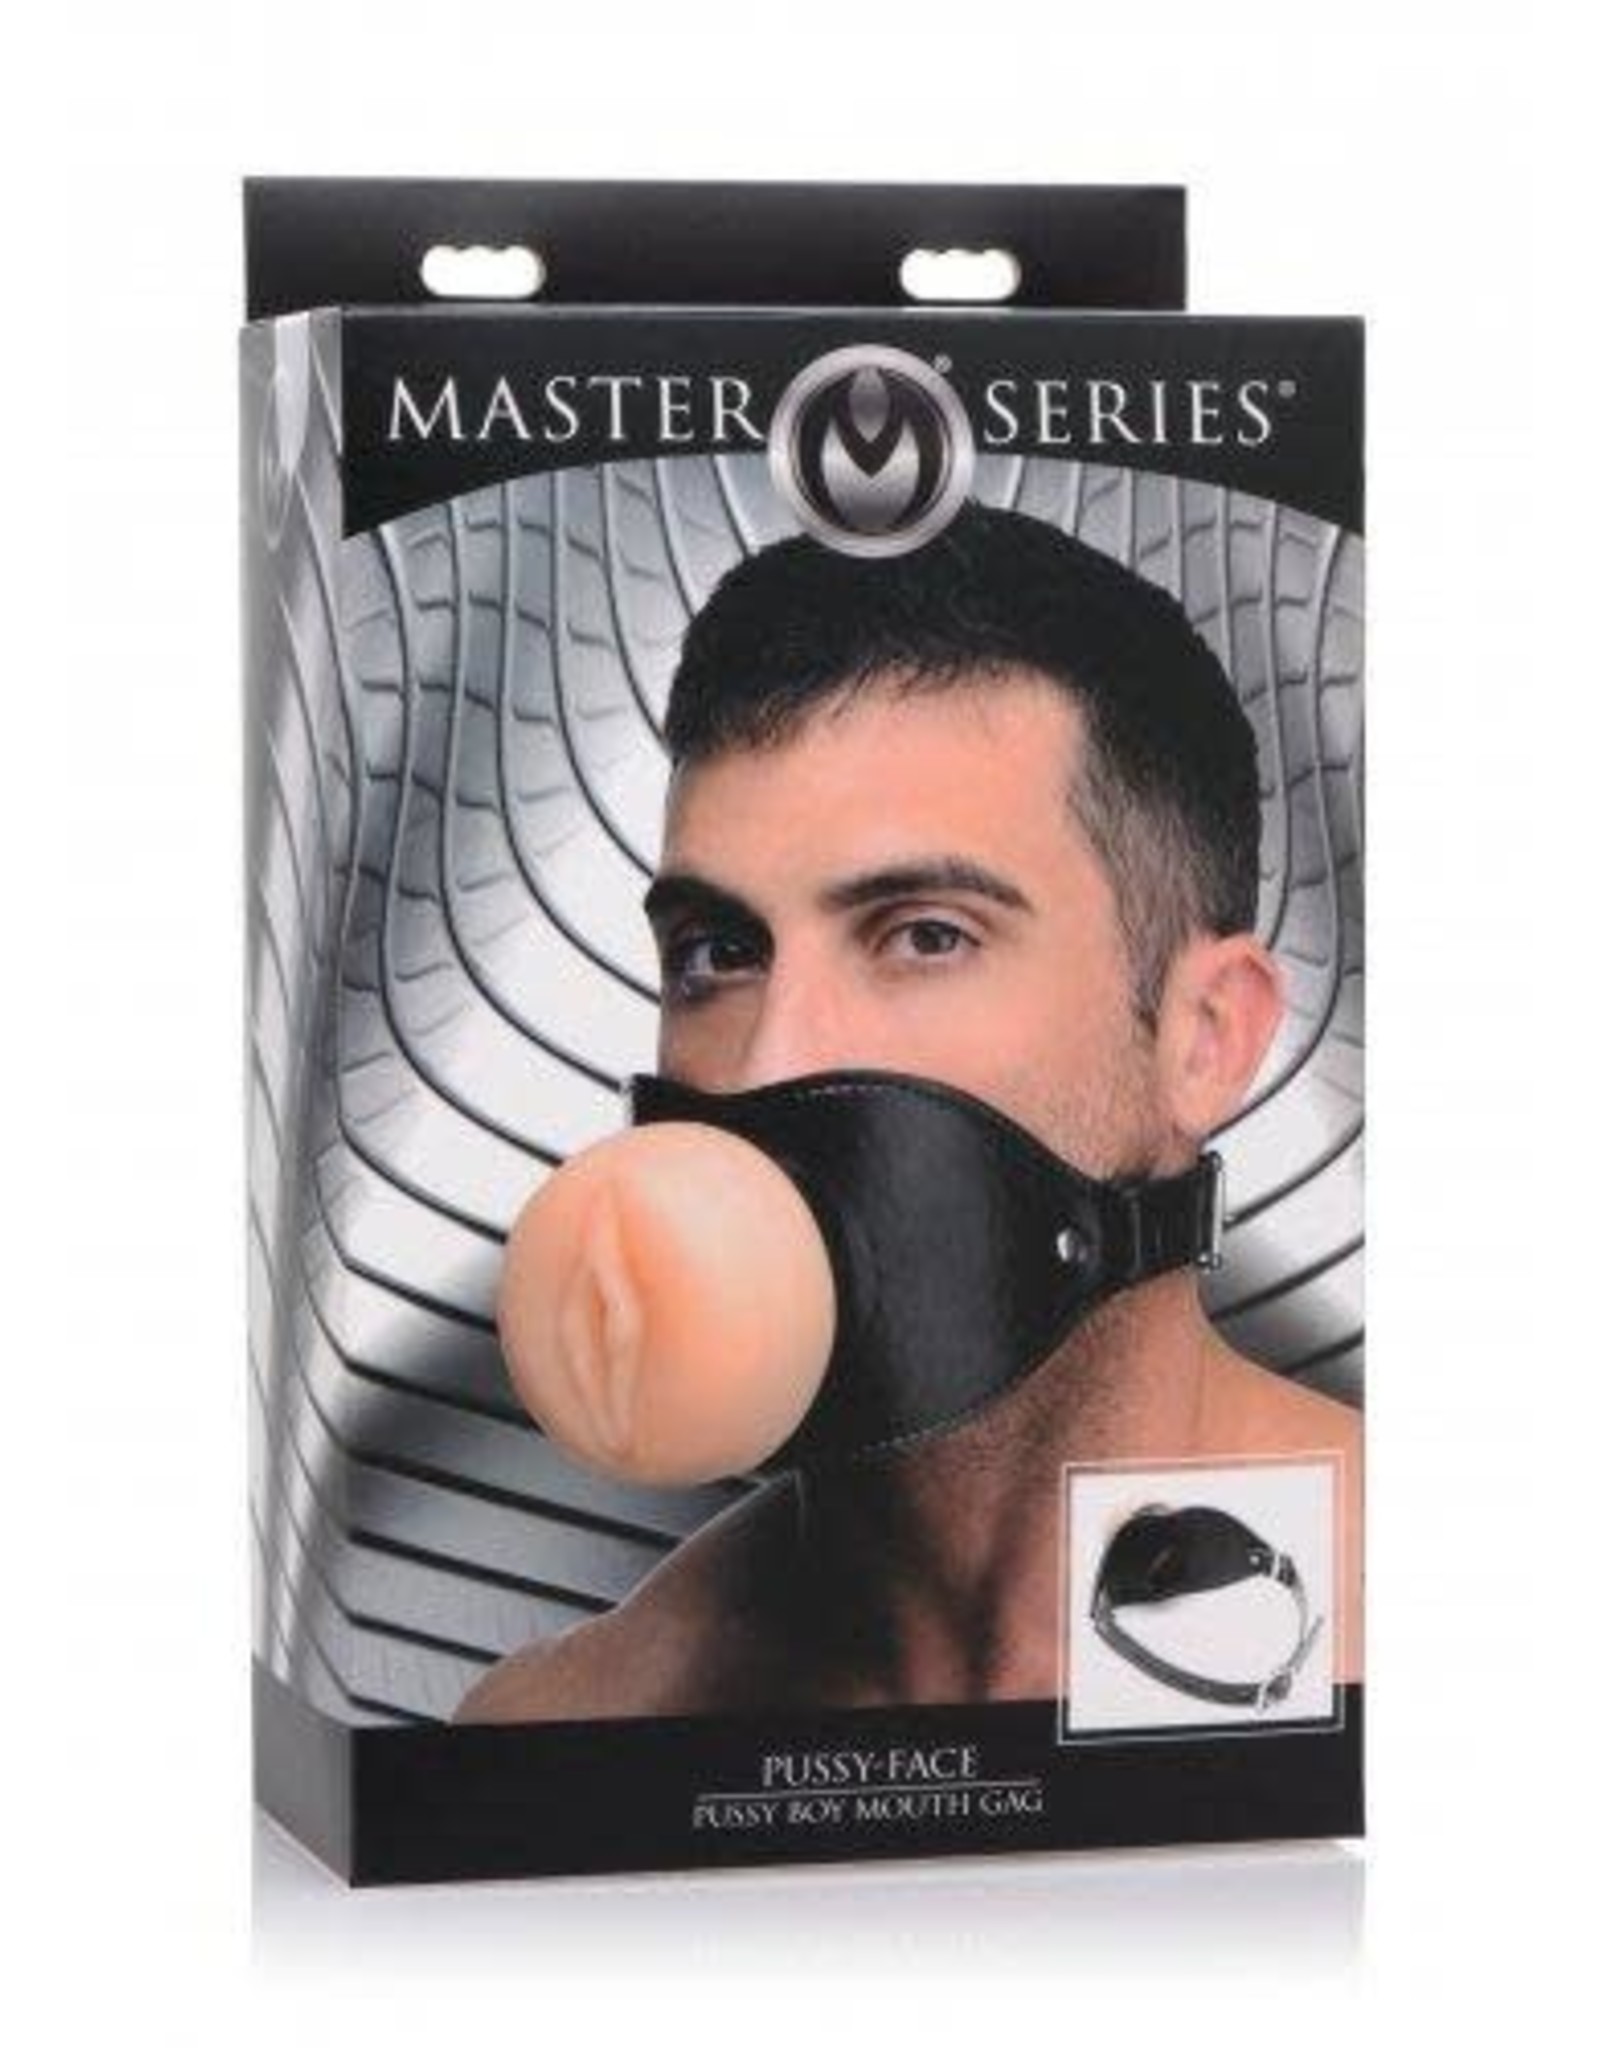 Master Series - Pussy-Face Oral Sex Mouth Gag